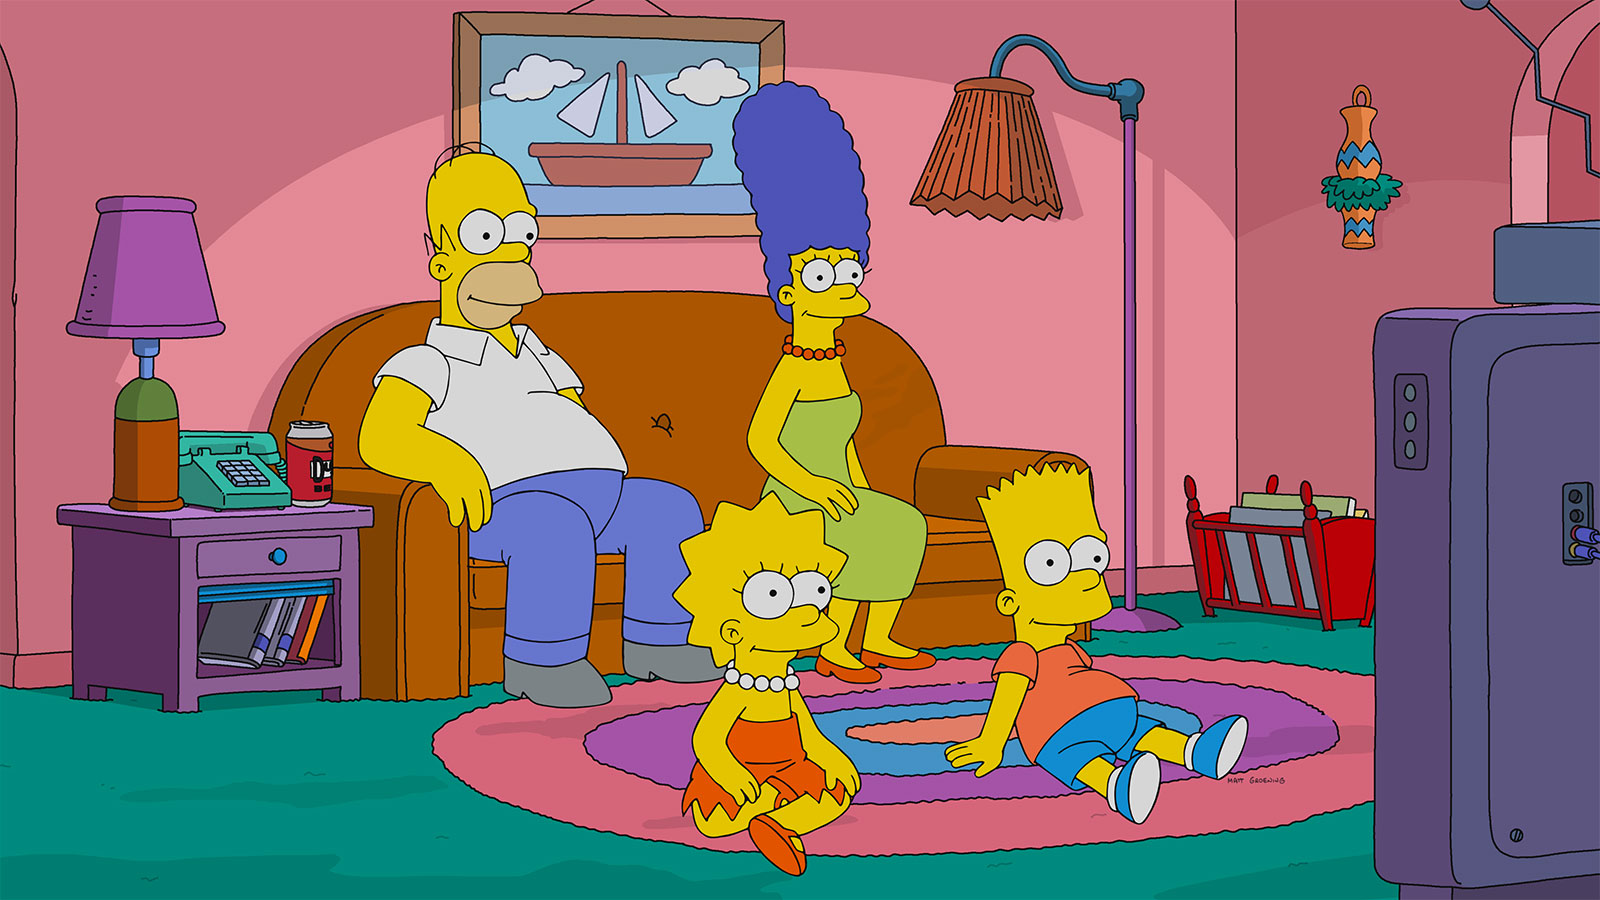 Can You Answer All 20 of These Super Easy Trivia Questions Correctly? The Simpsons